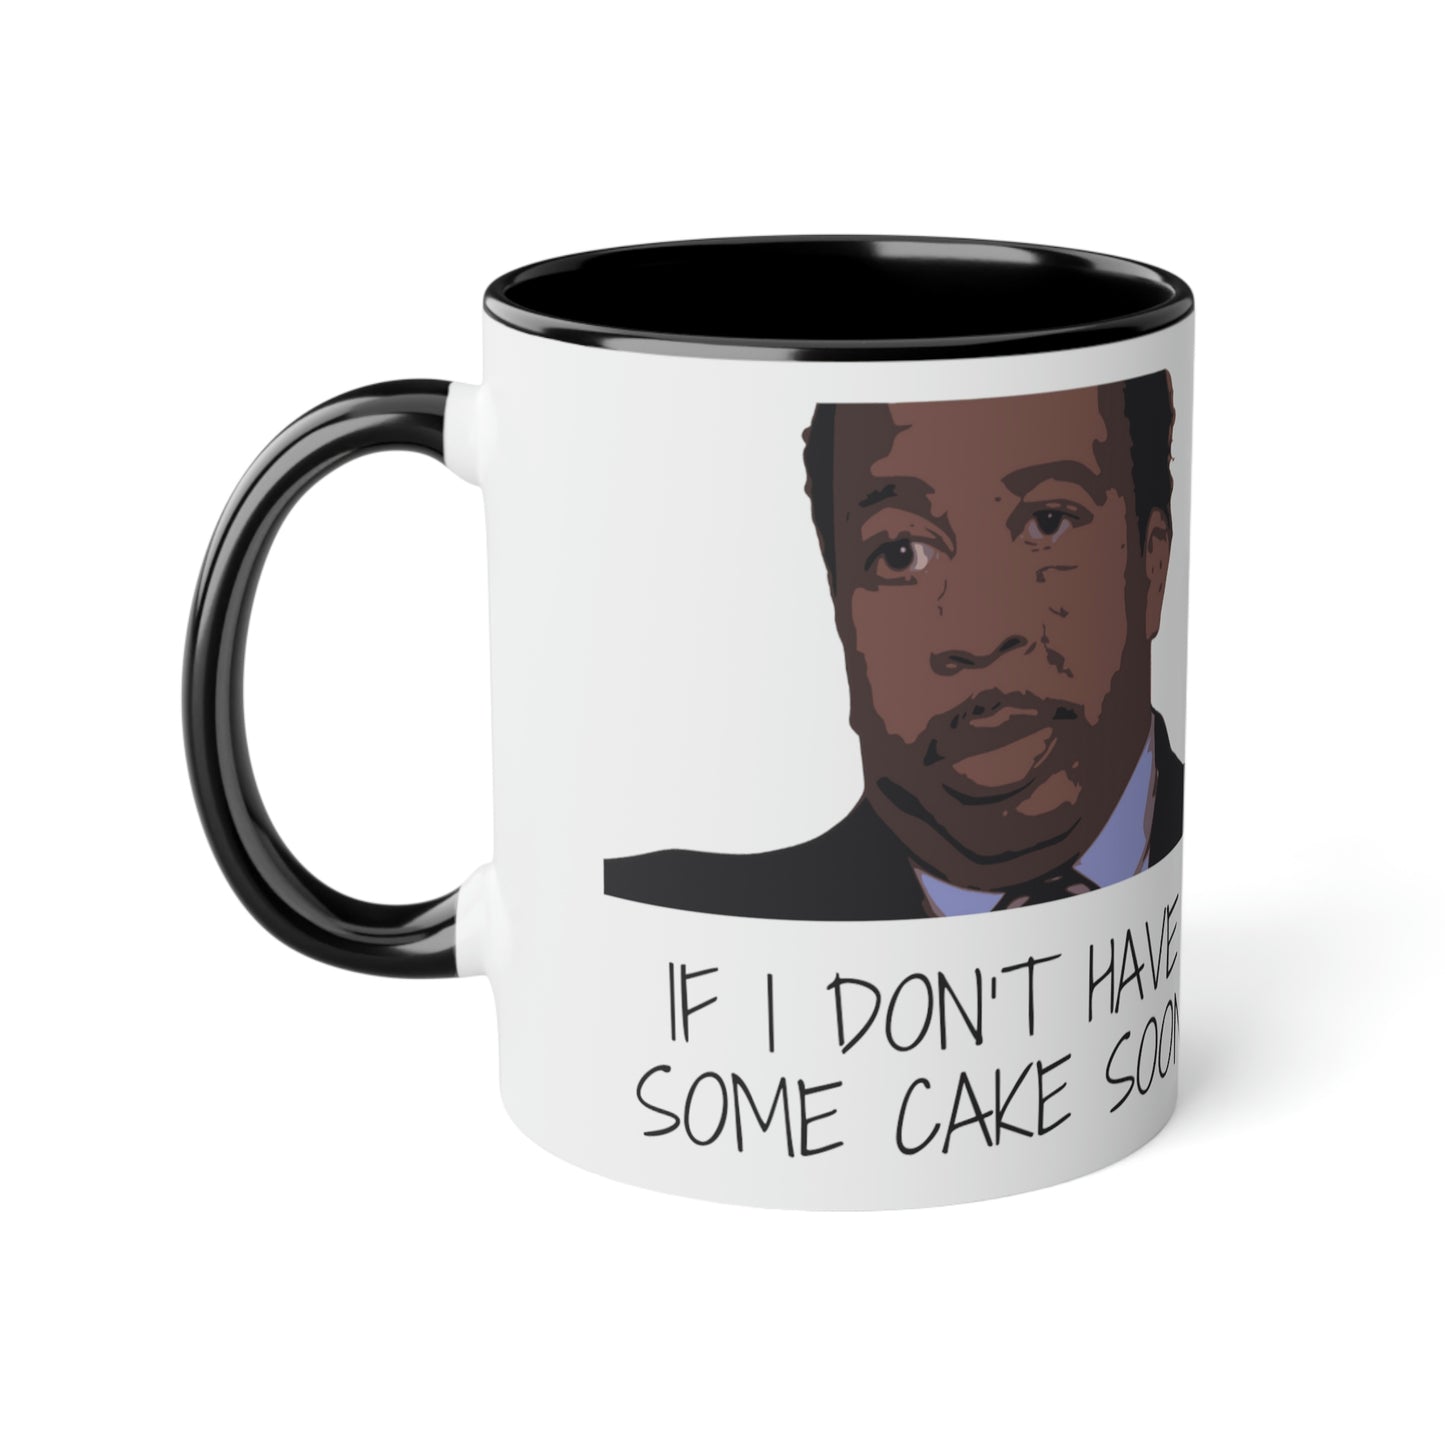 Meme Mug Dunder Mifflin workplace comedy - If I don’t have some cake soon, I might die